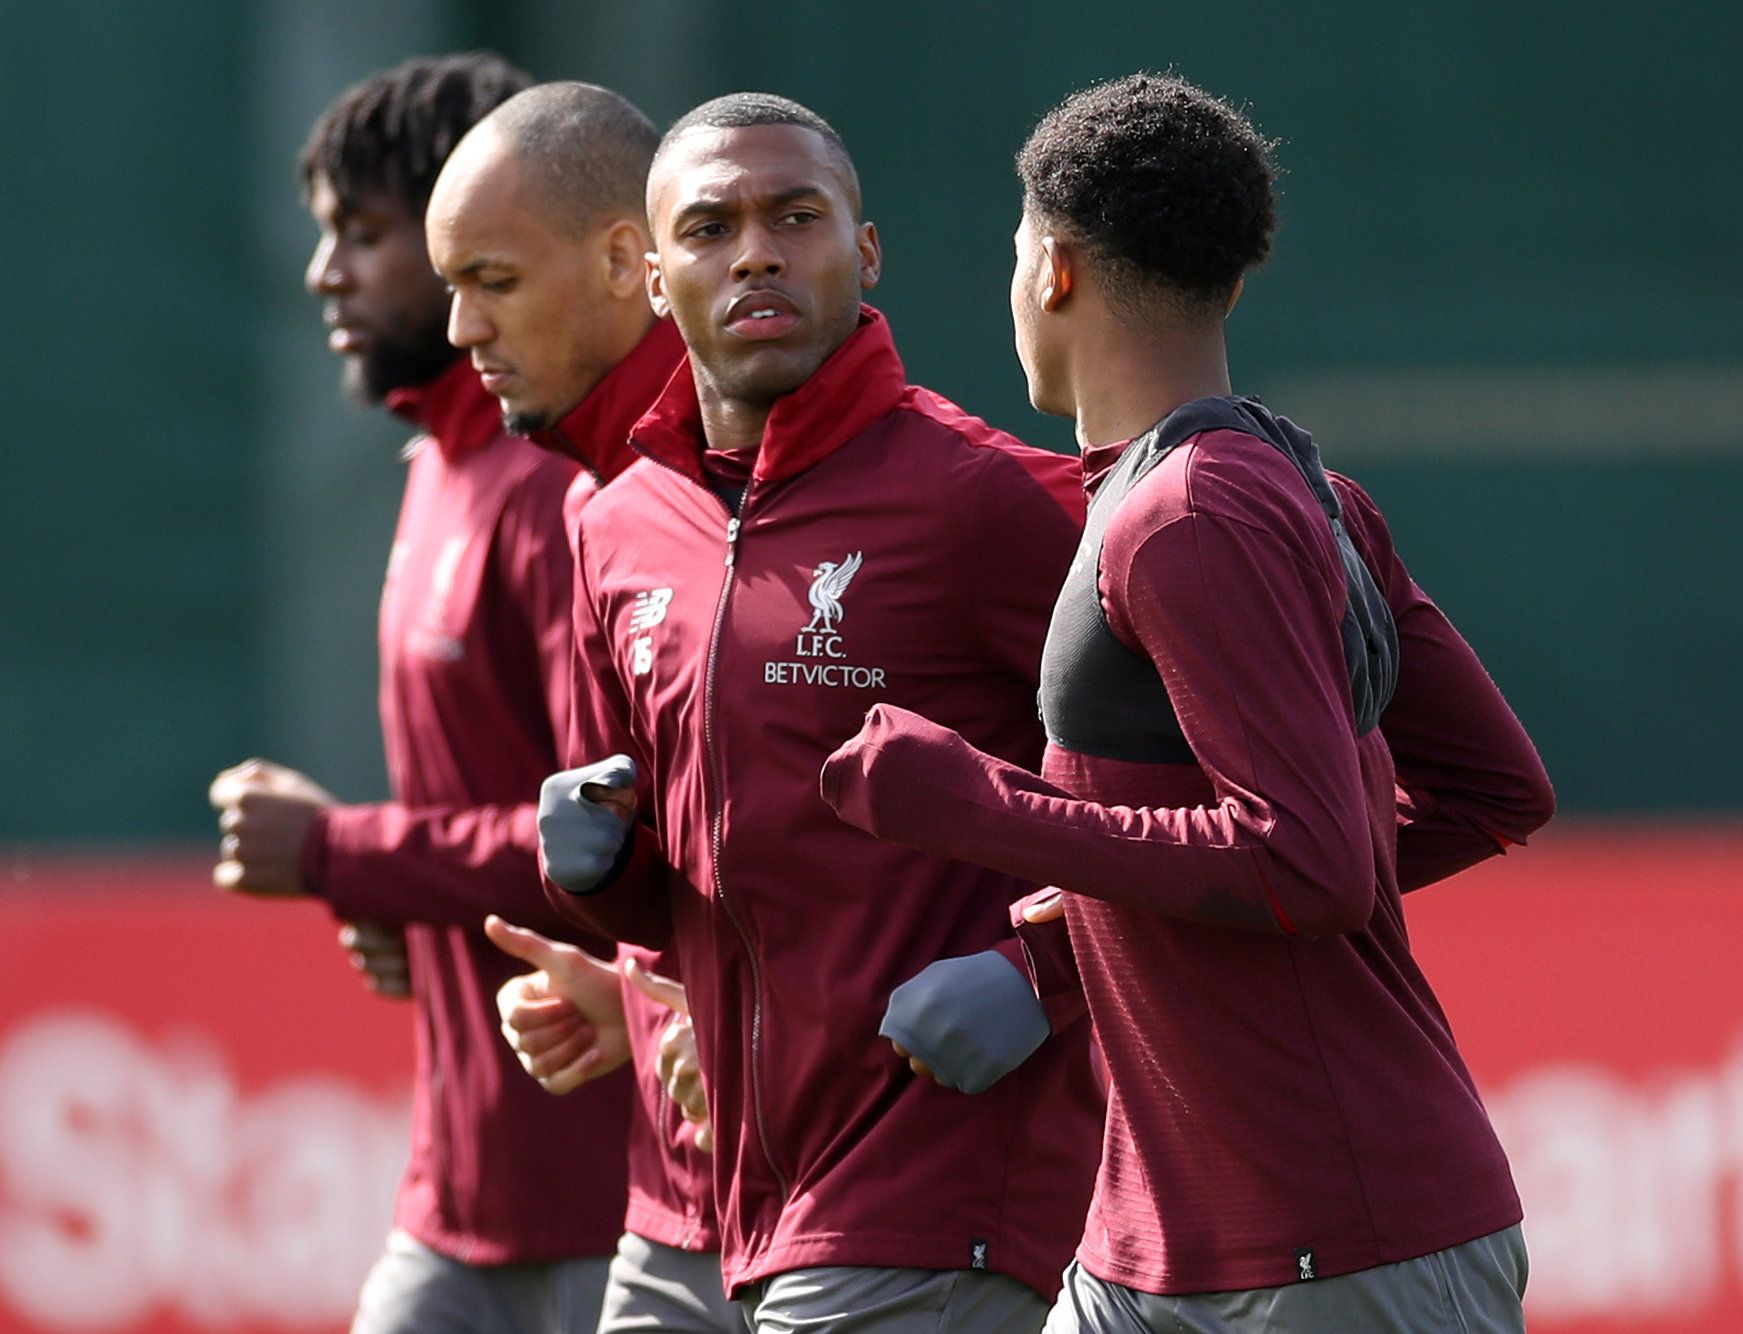 Soccer Football - Champions League - Liverpool Training - Melwood, Liverpool, Britain - May 6, 2019   Liverpool's Daniel Sturridge during training   Action Images via Reuters/Carl Recine